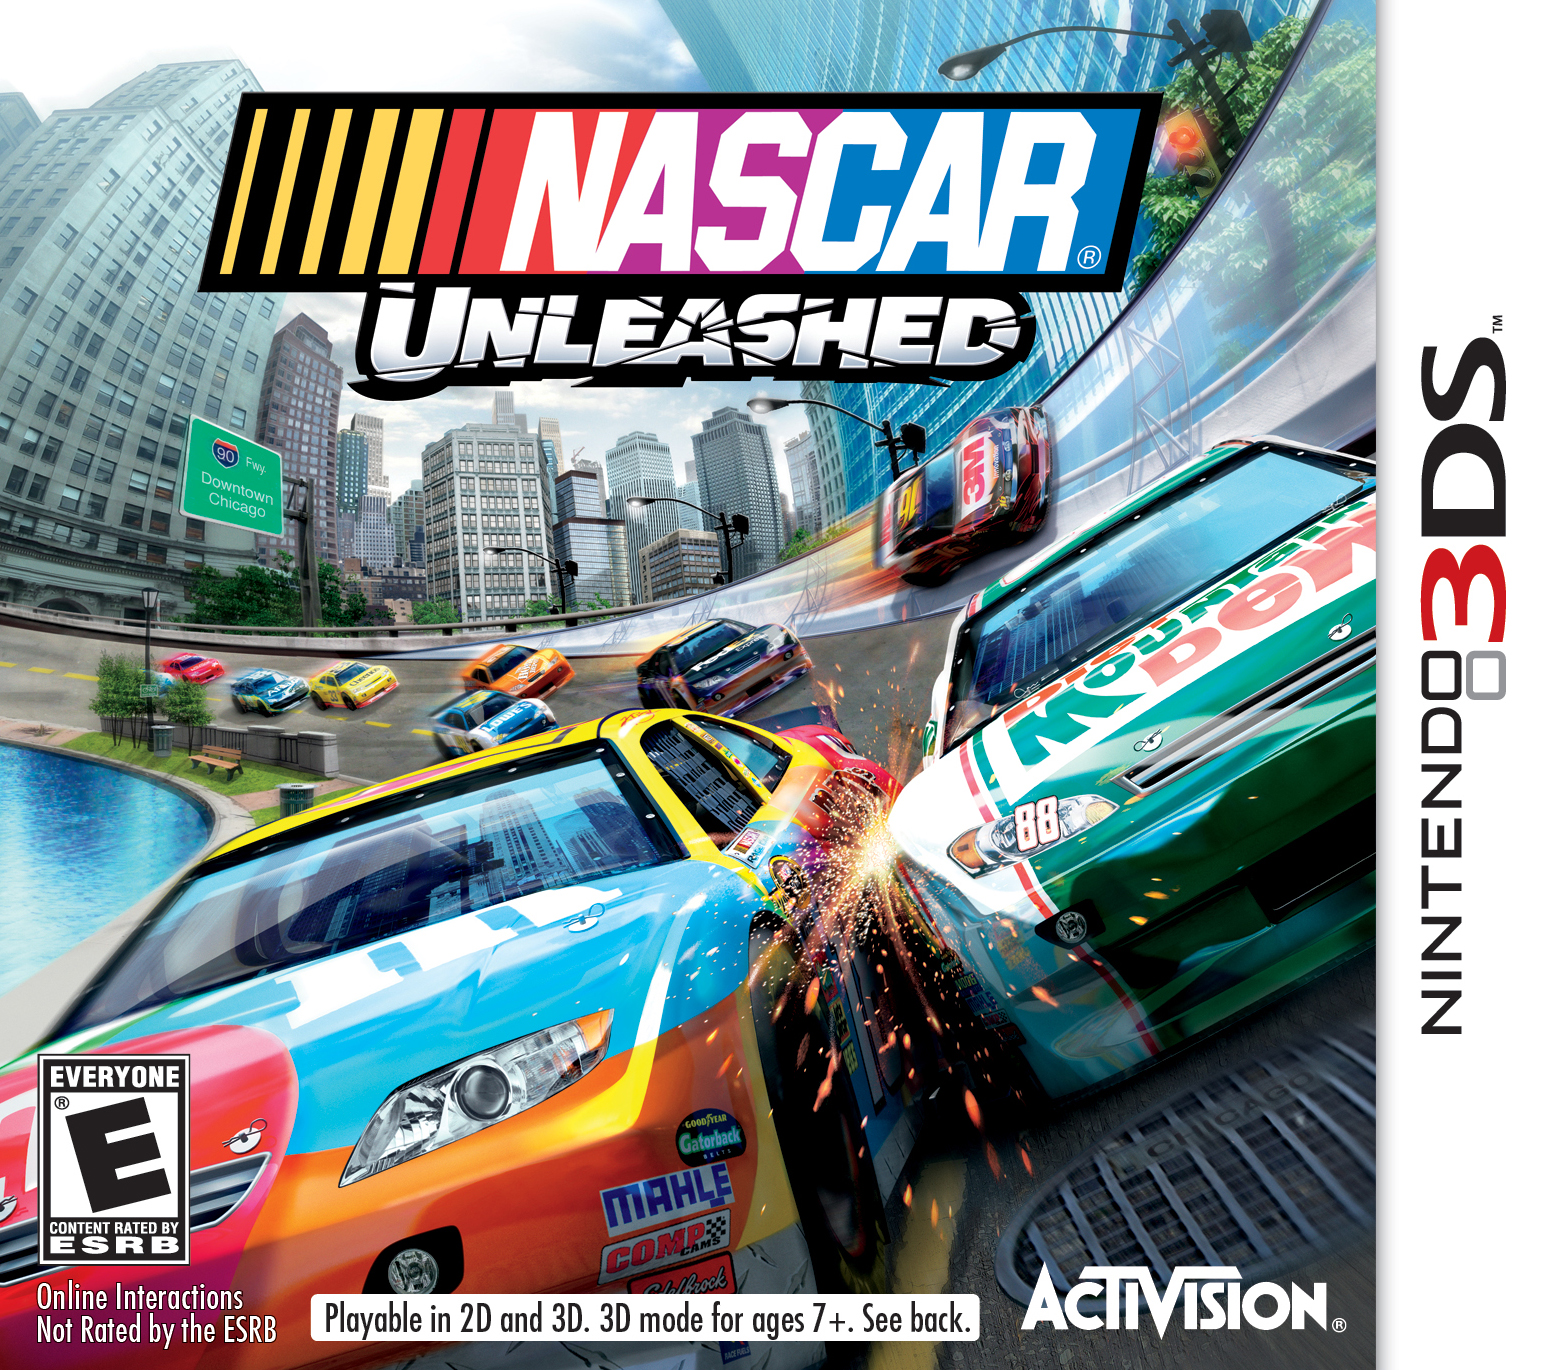 ACTIVISION GOES FULL THROTTLE WITH NASCAR UNLEASHED